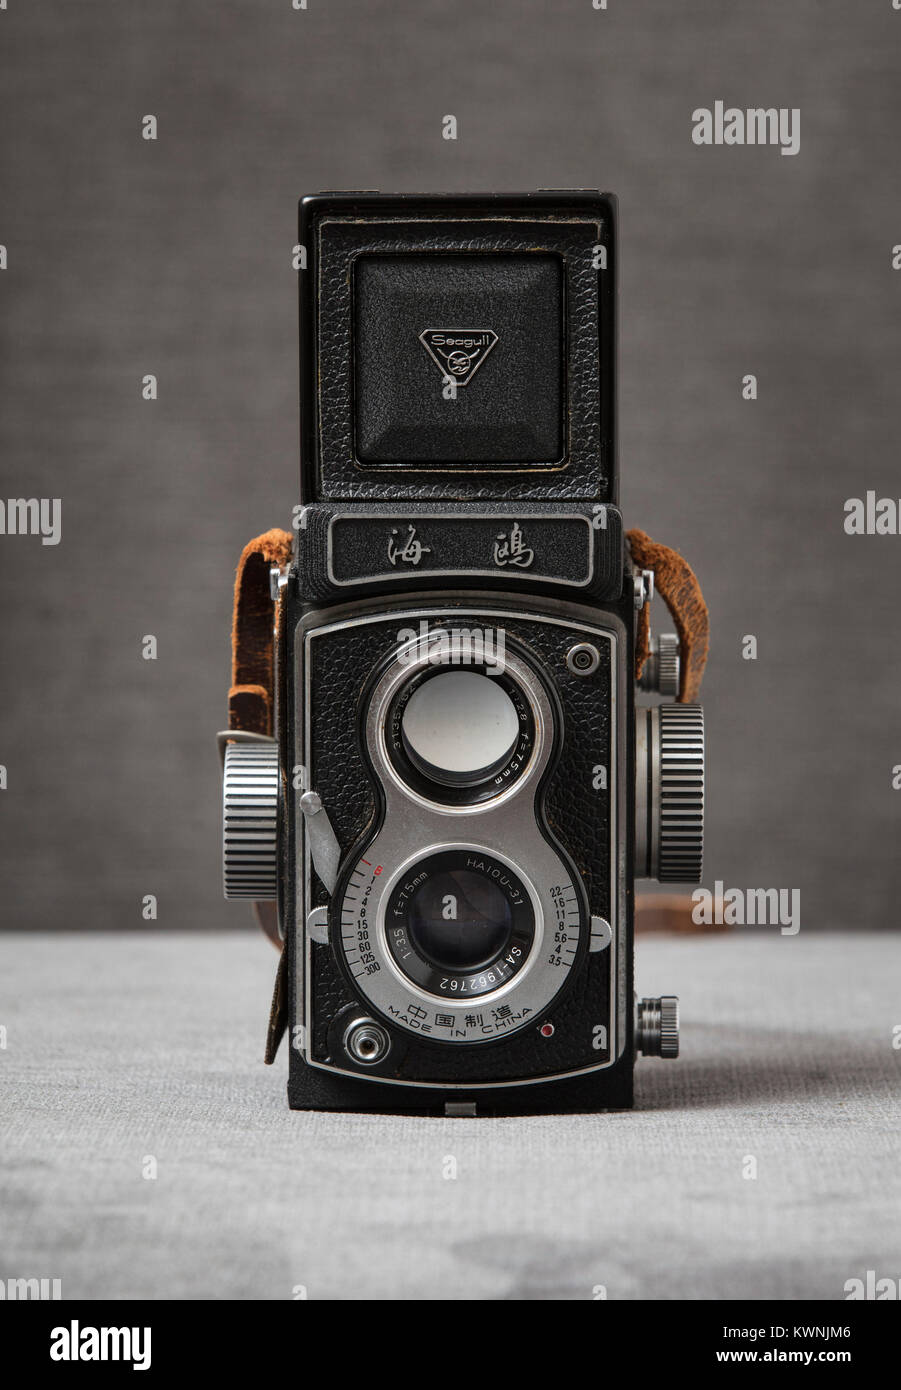 a-seagull-4-tlr-twin-lens-reflex-camera-with-brown-strap-with-a-grey-KWNJM6.jpg